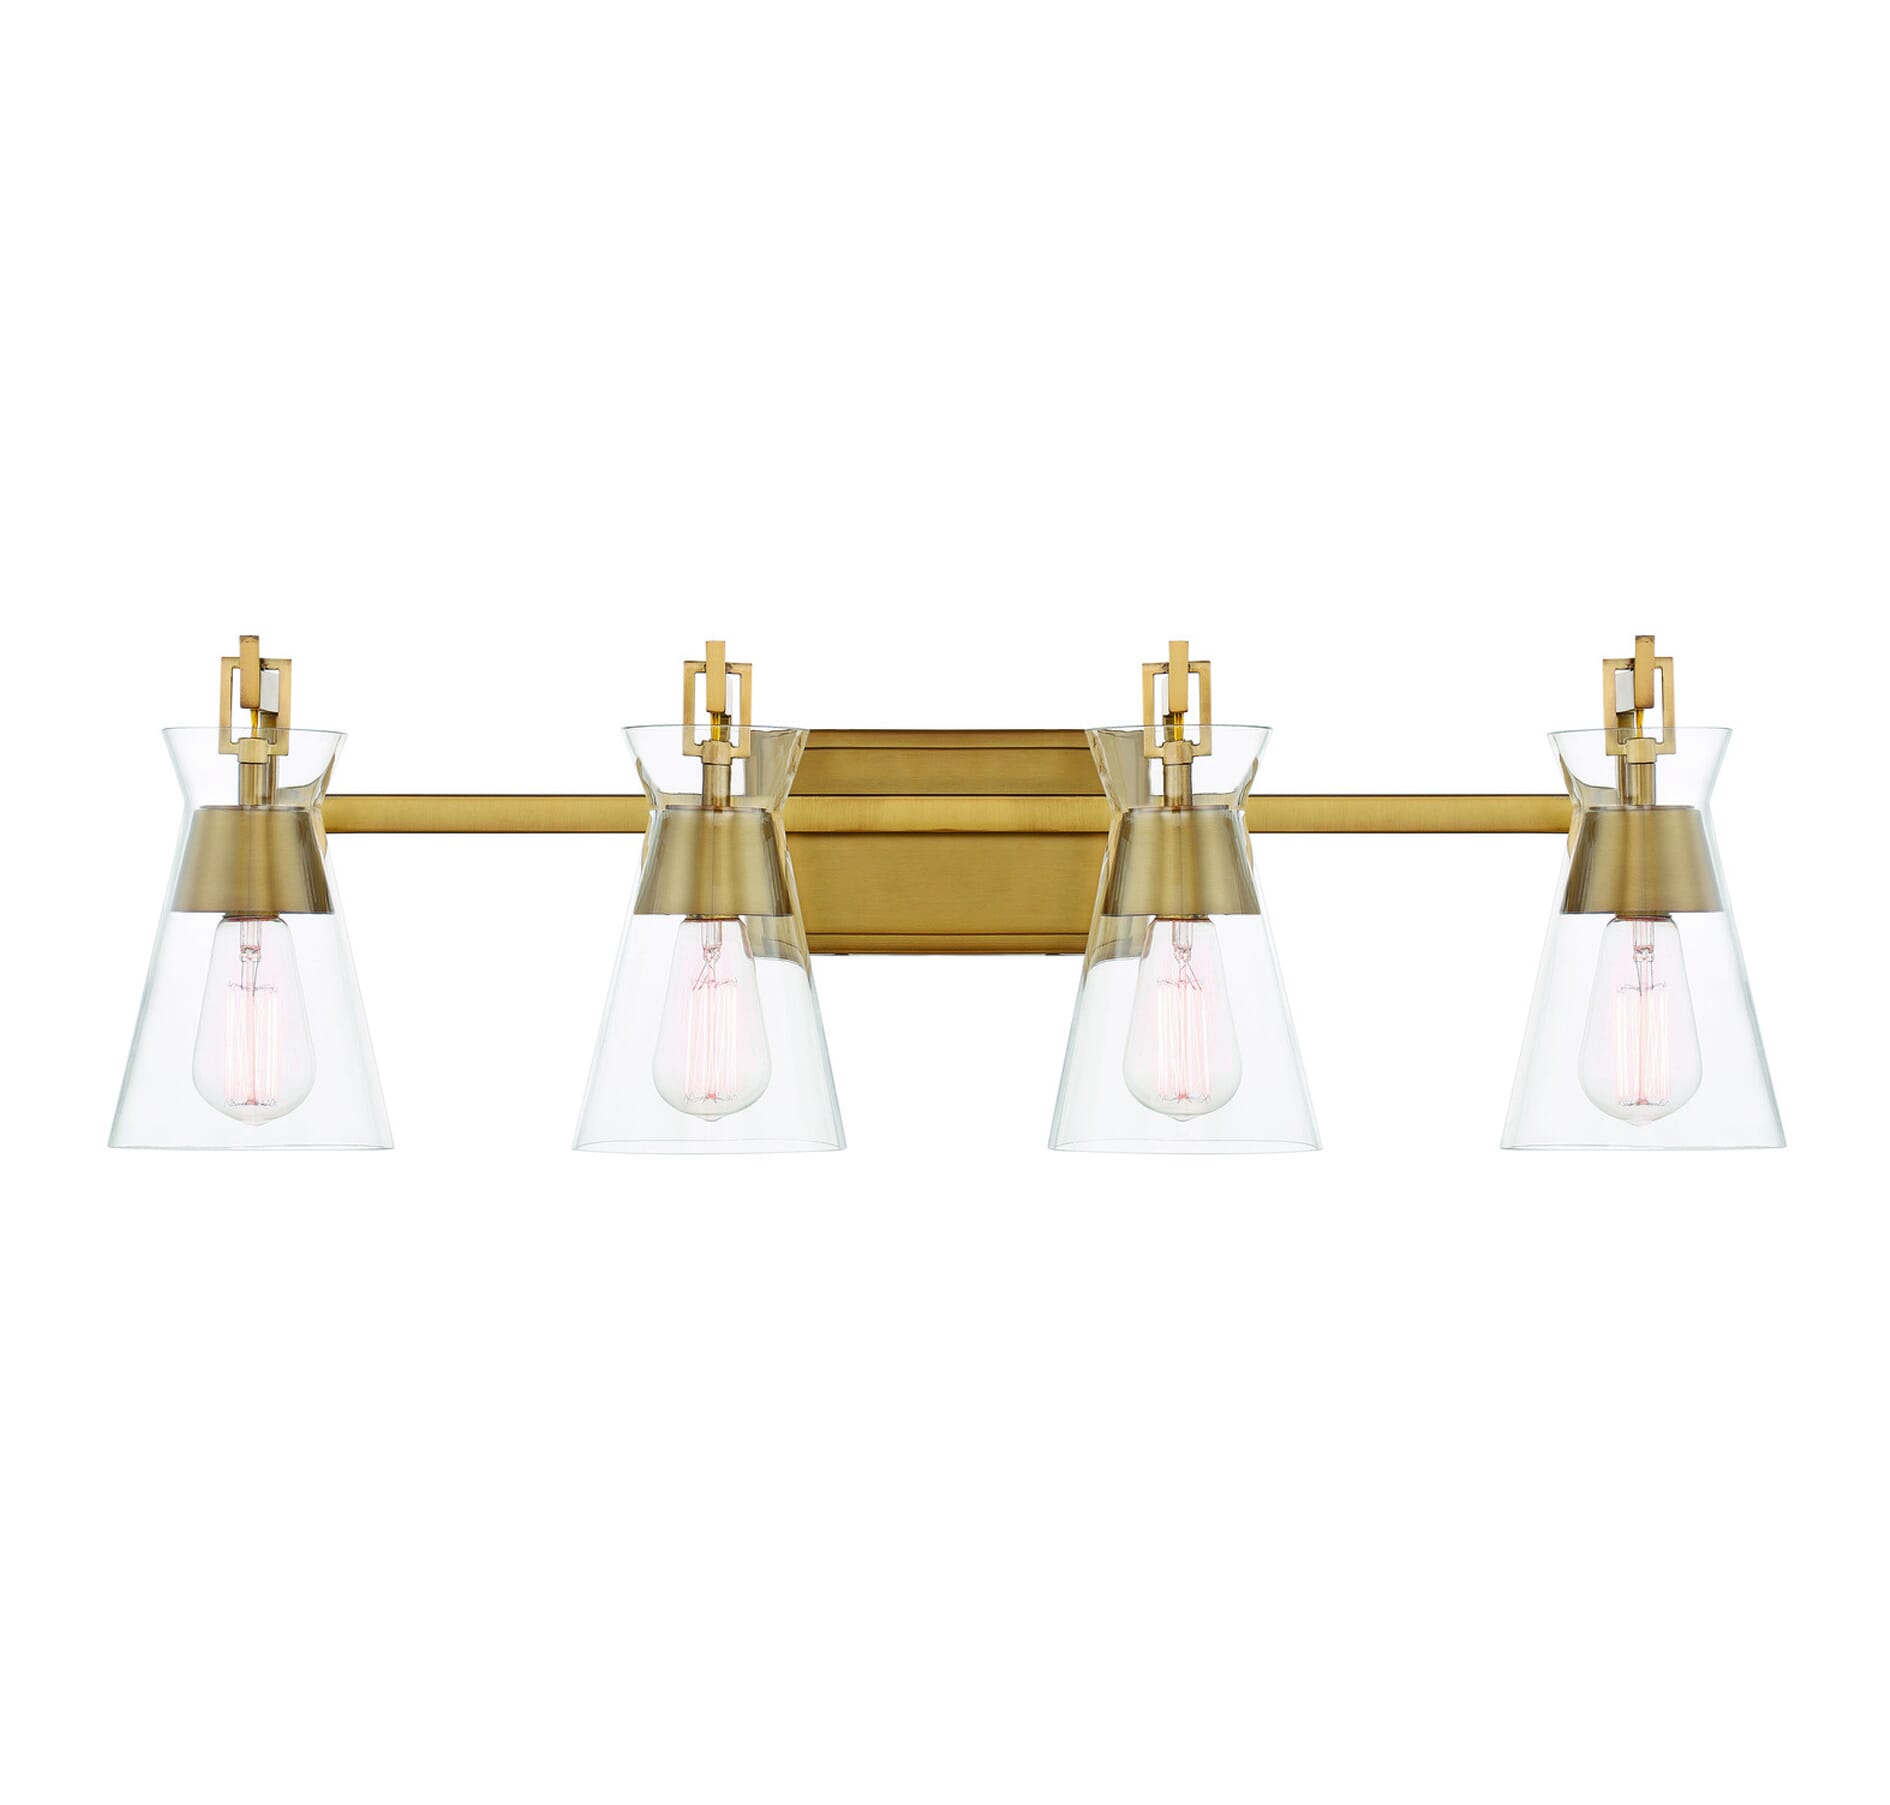 3 Fixtures from LightsOnline That Are All About the Brass Finish - LightsOnline Blog